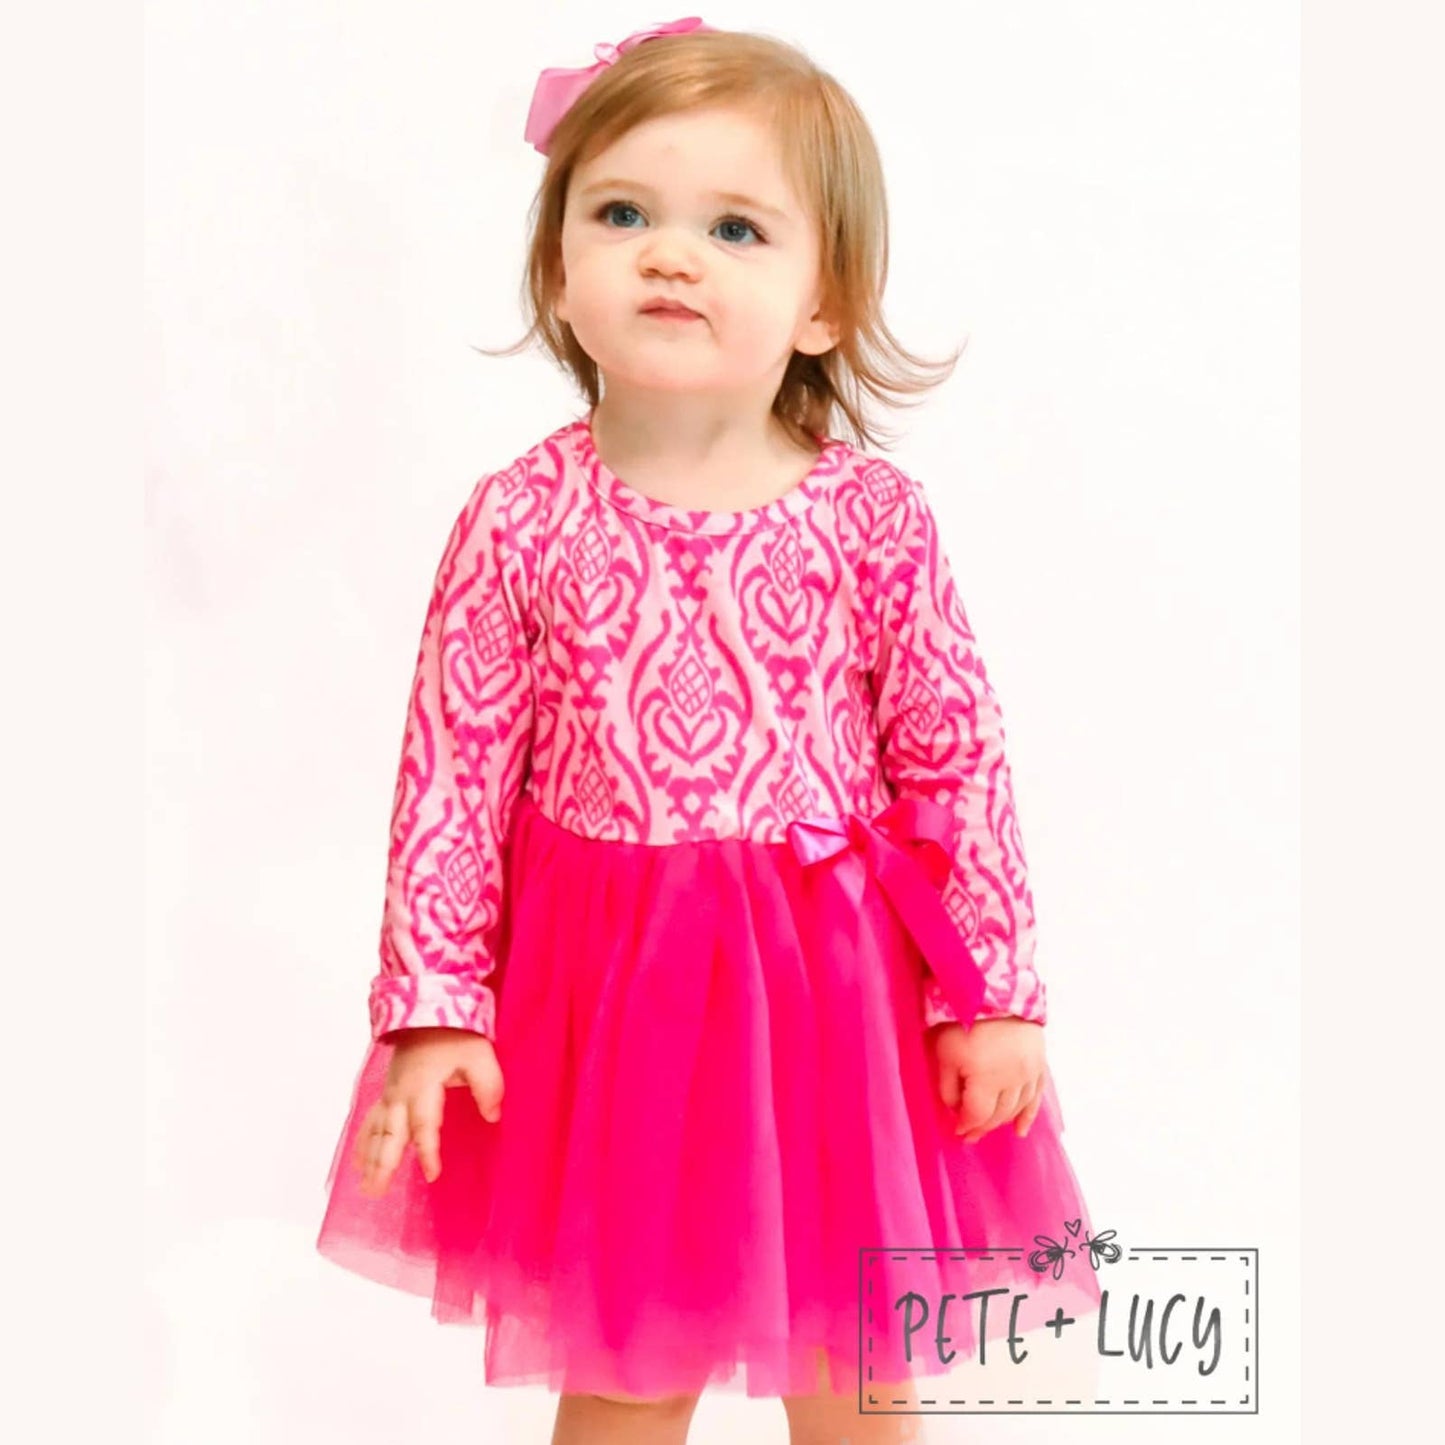 PETE + LUCY Pink Moroccan Long Sleeve Tulle Dress